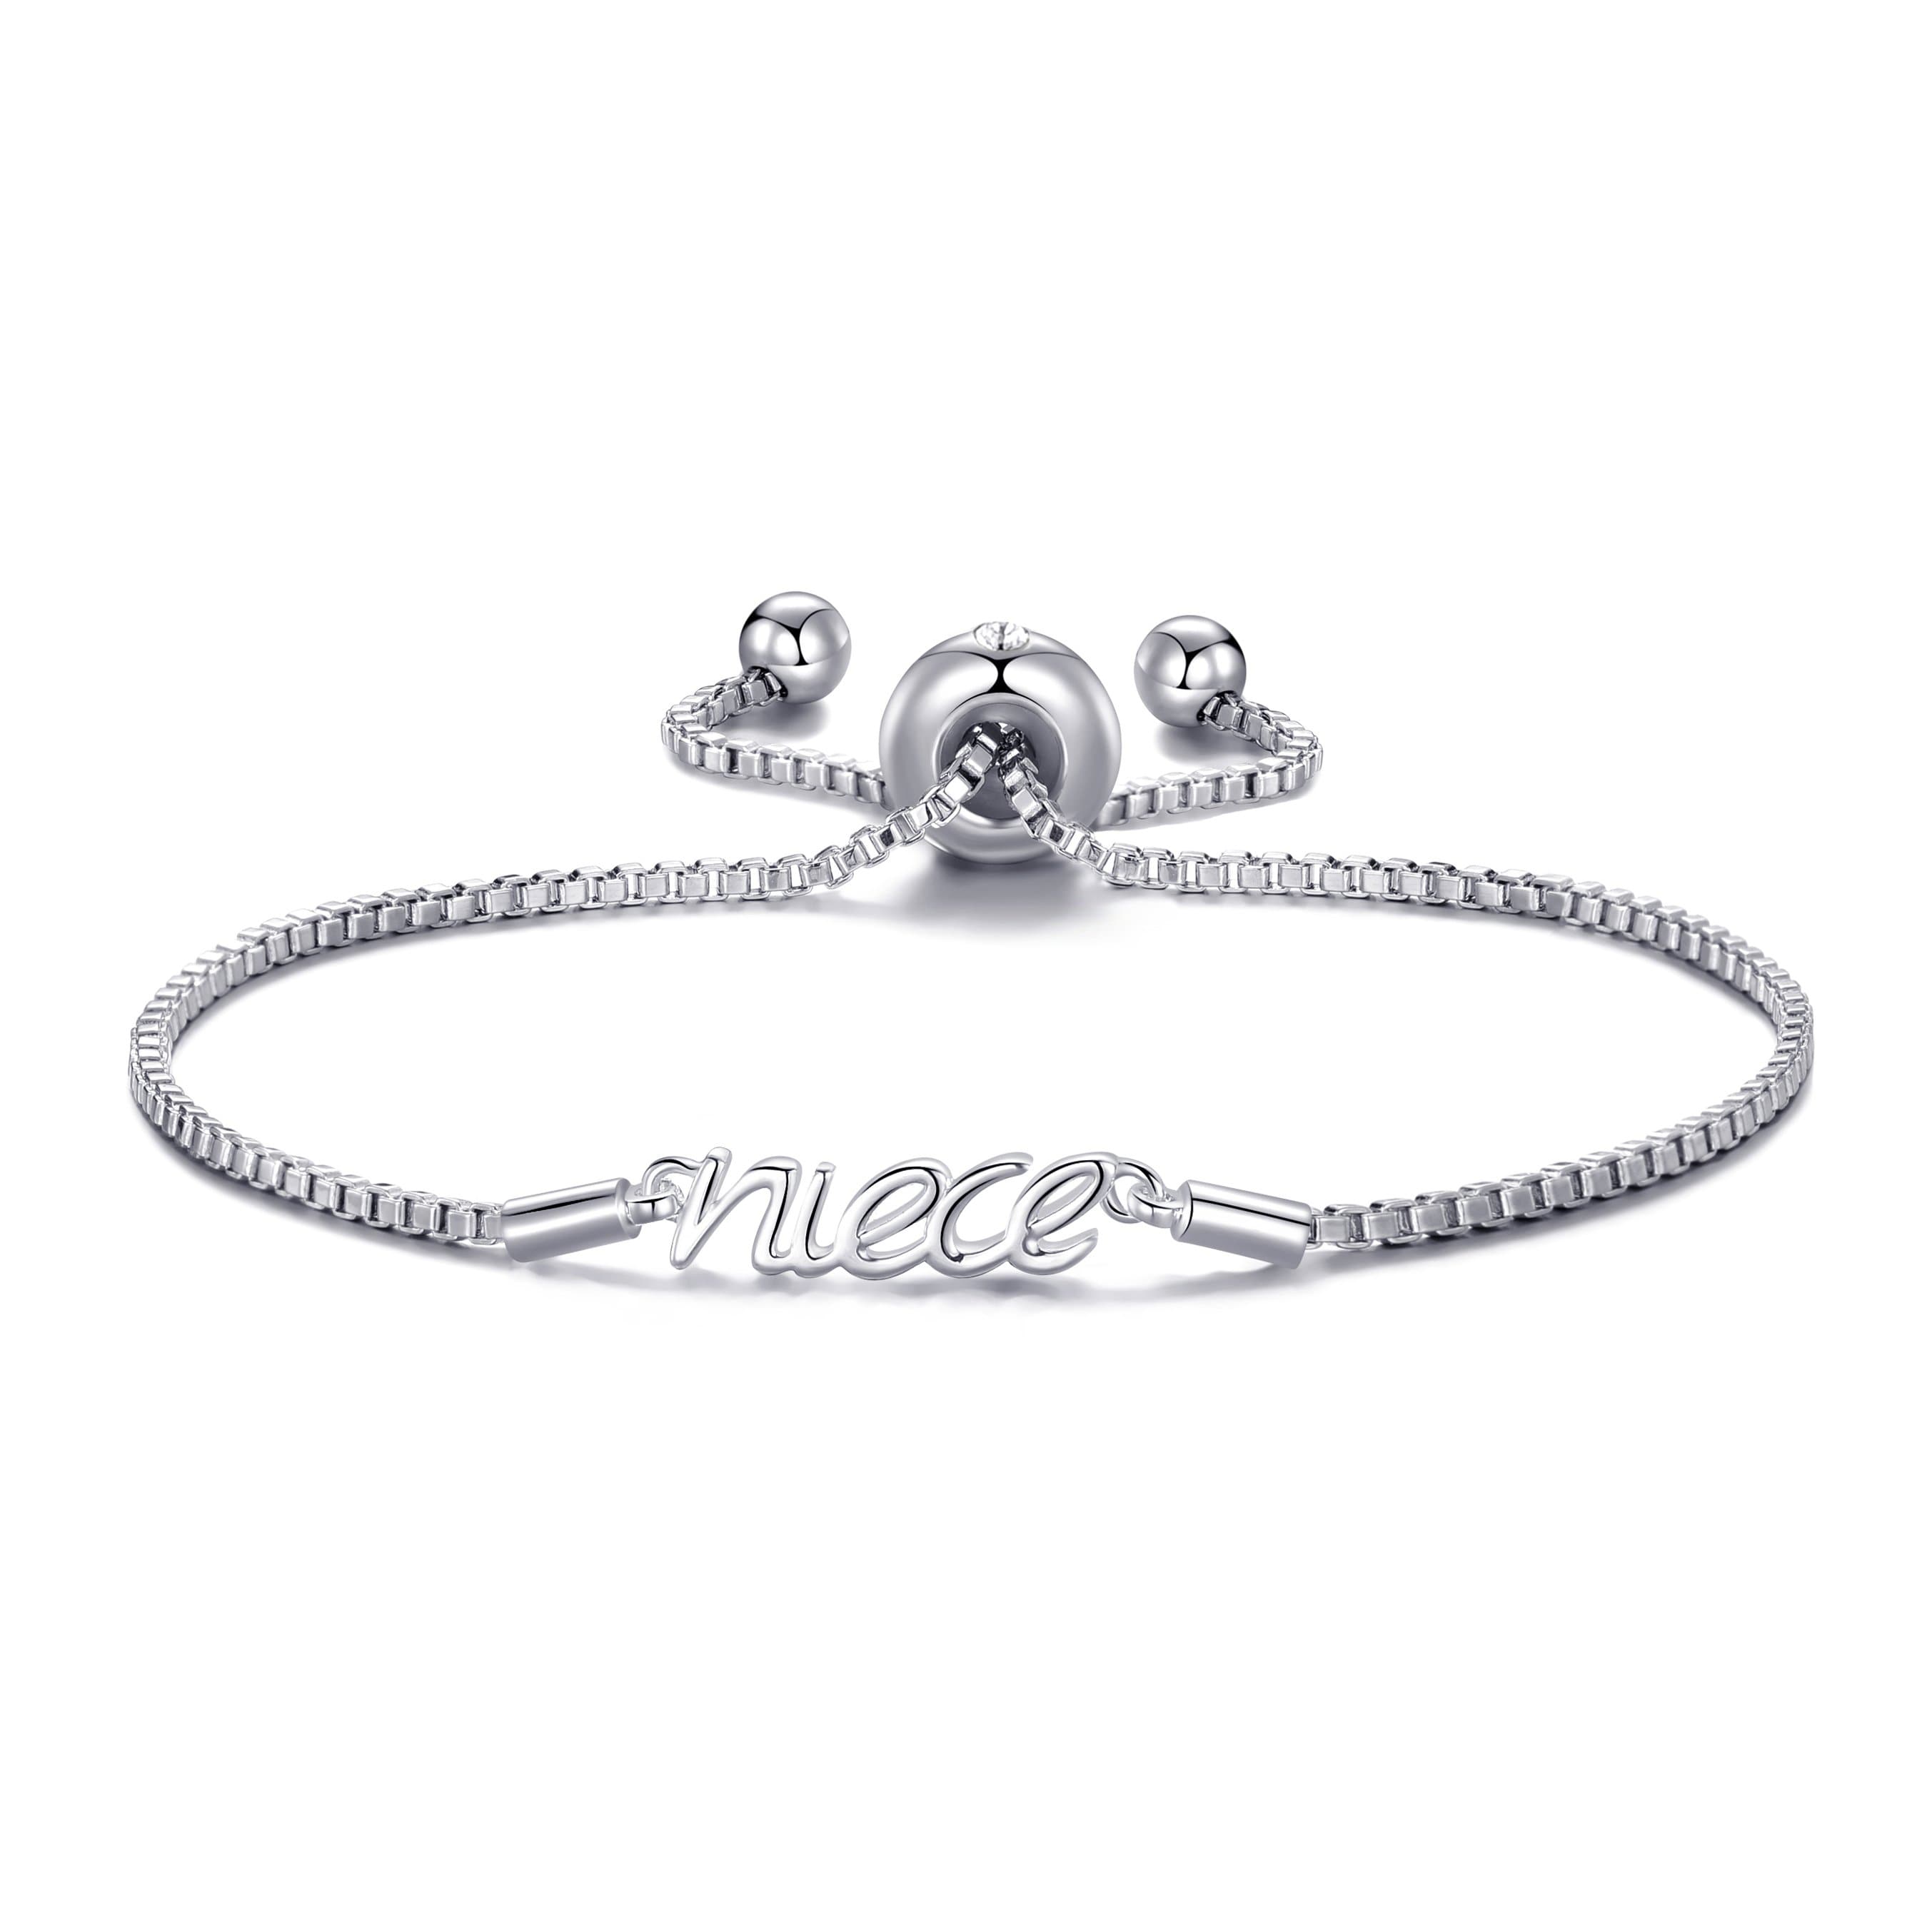 Silver Plated Niece Bracelet Created with Zircondia® Crystals by Philip Jones Jewellery